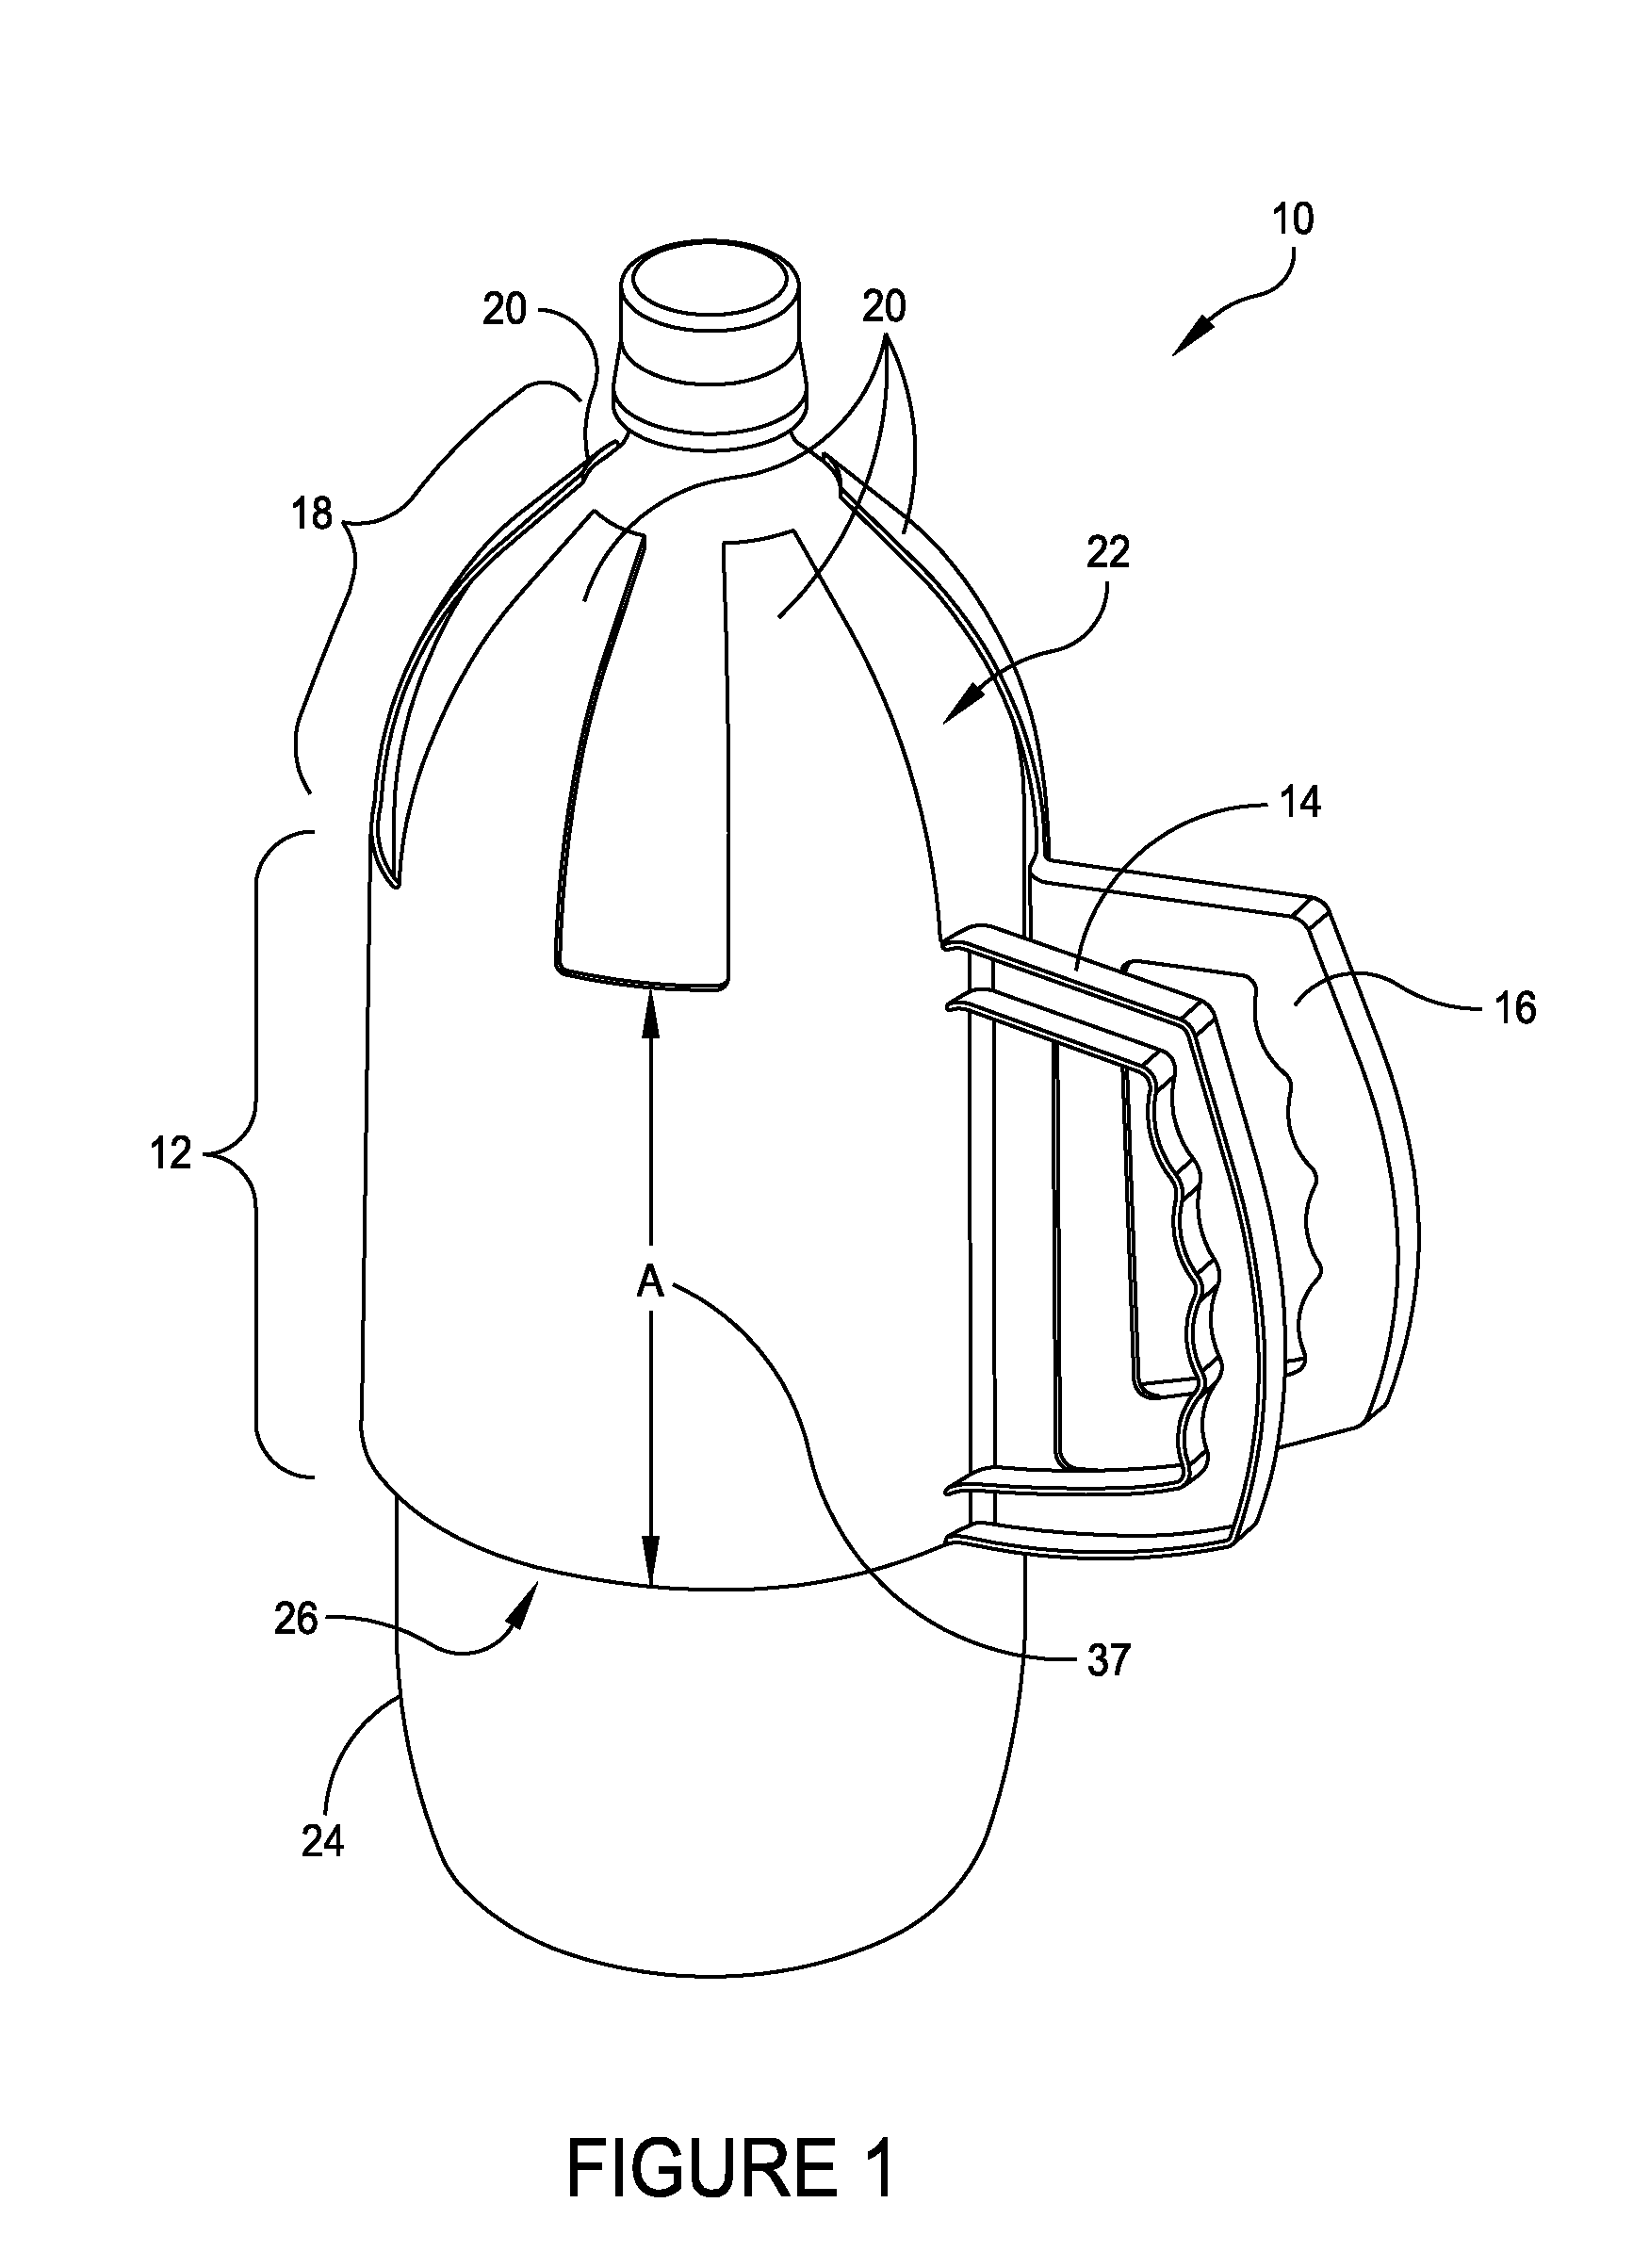 Gripping apparatus and method of use